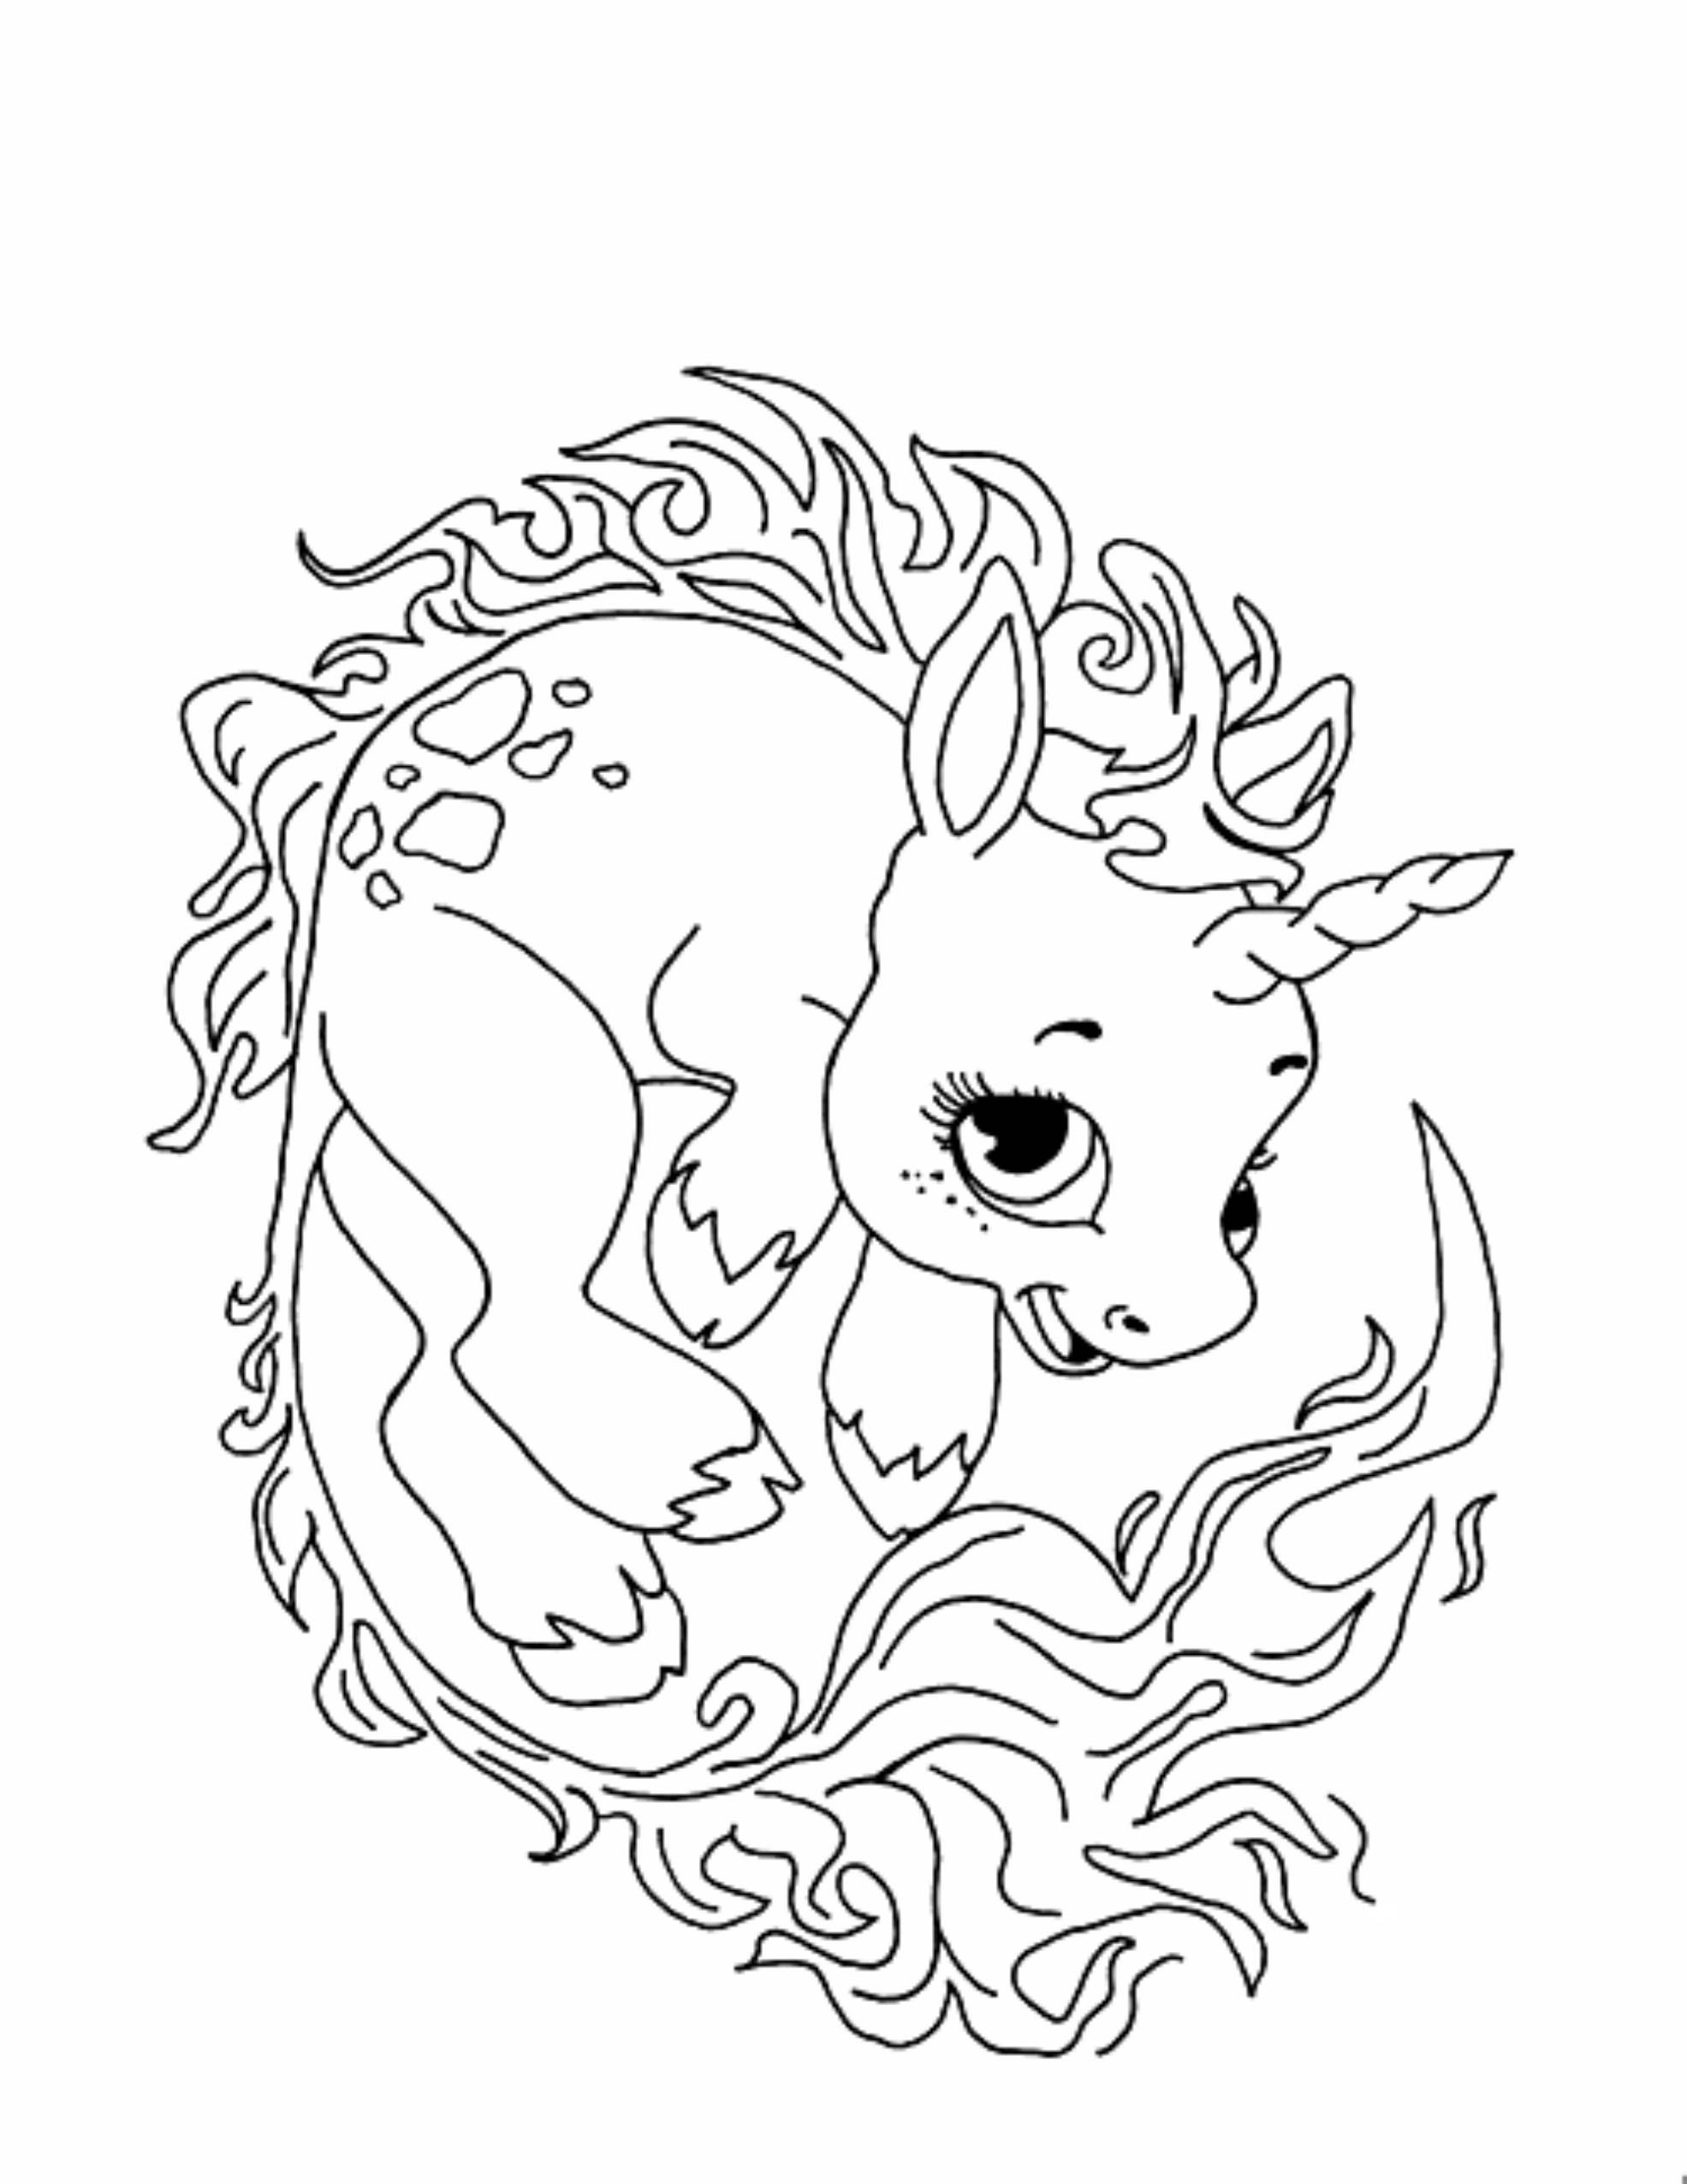 Coloring Pages Of Unicorns to Print